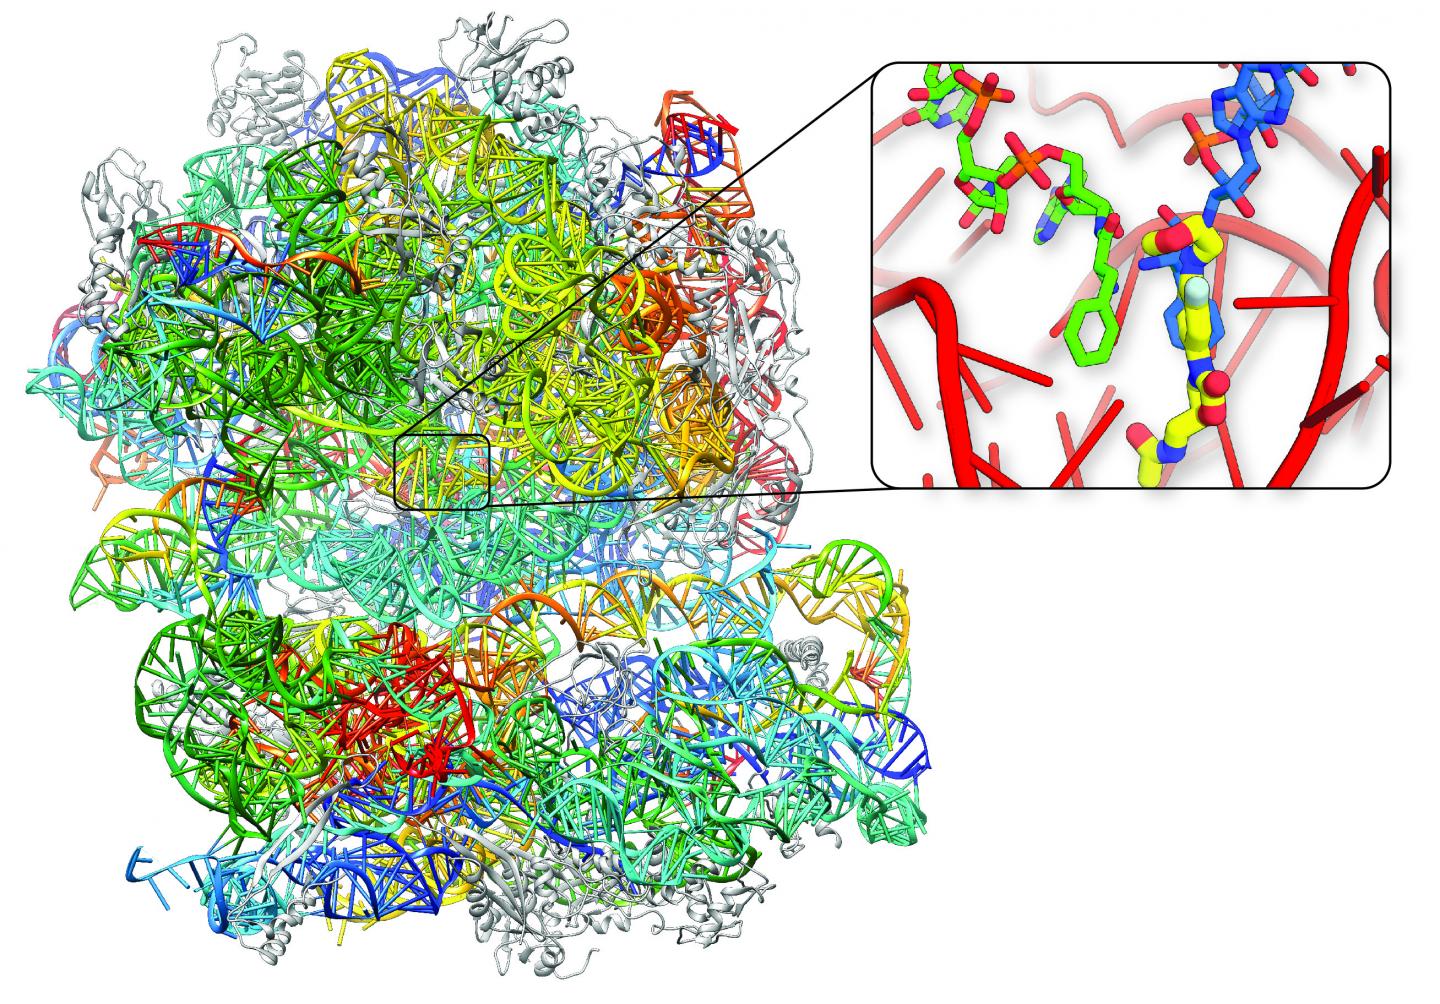 The Protein Making Machine from Golden Staph, the Bacterial Ribosome